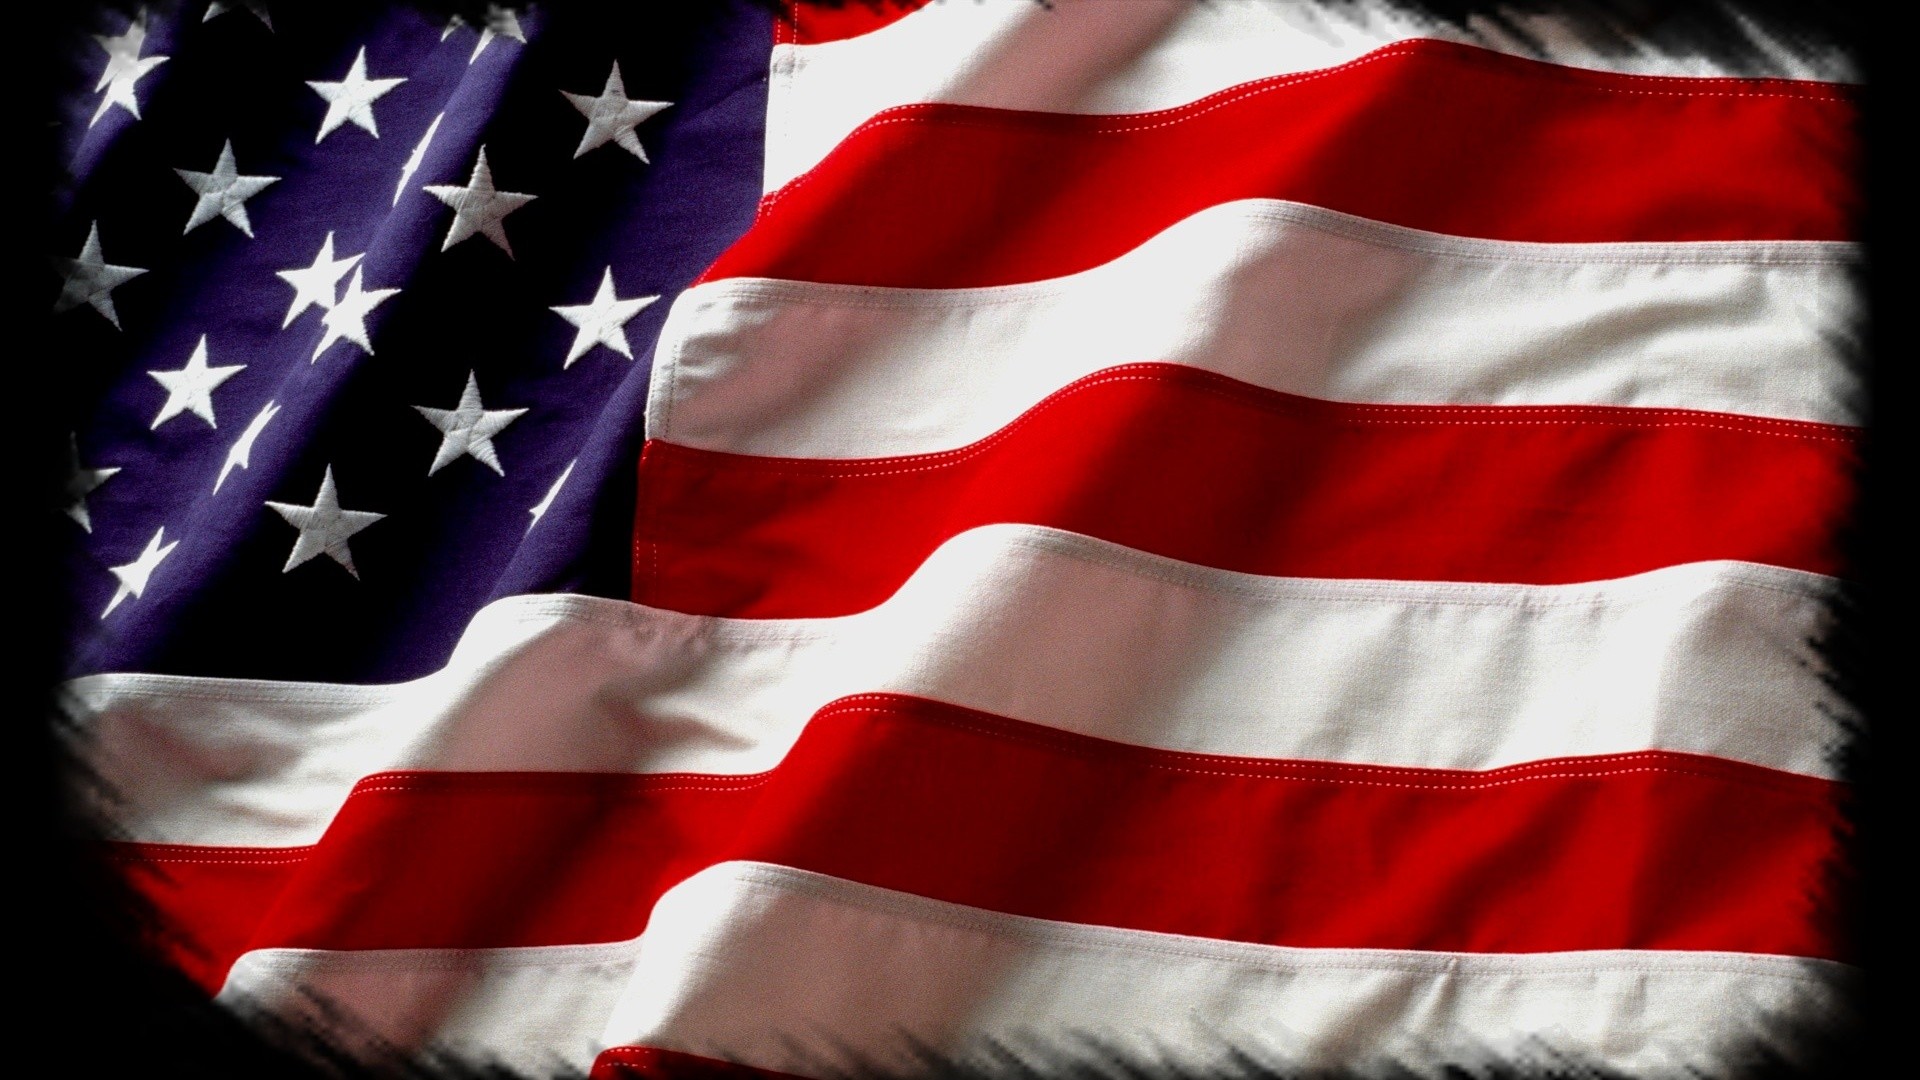 1920x1080 15 HD American Flag Desktop Wallpapers For Free Download